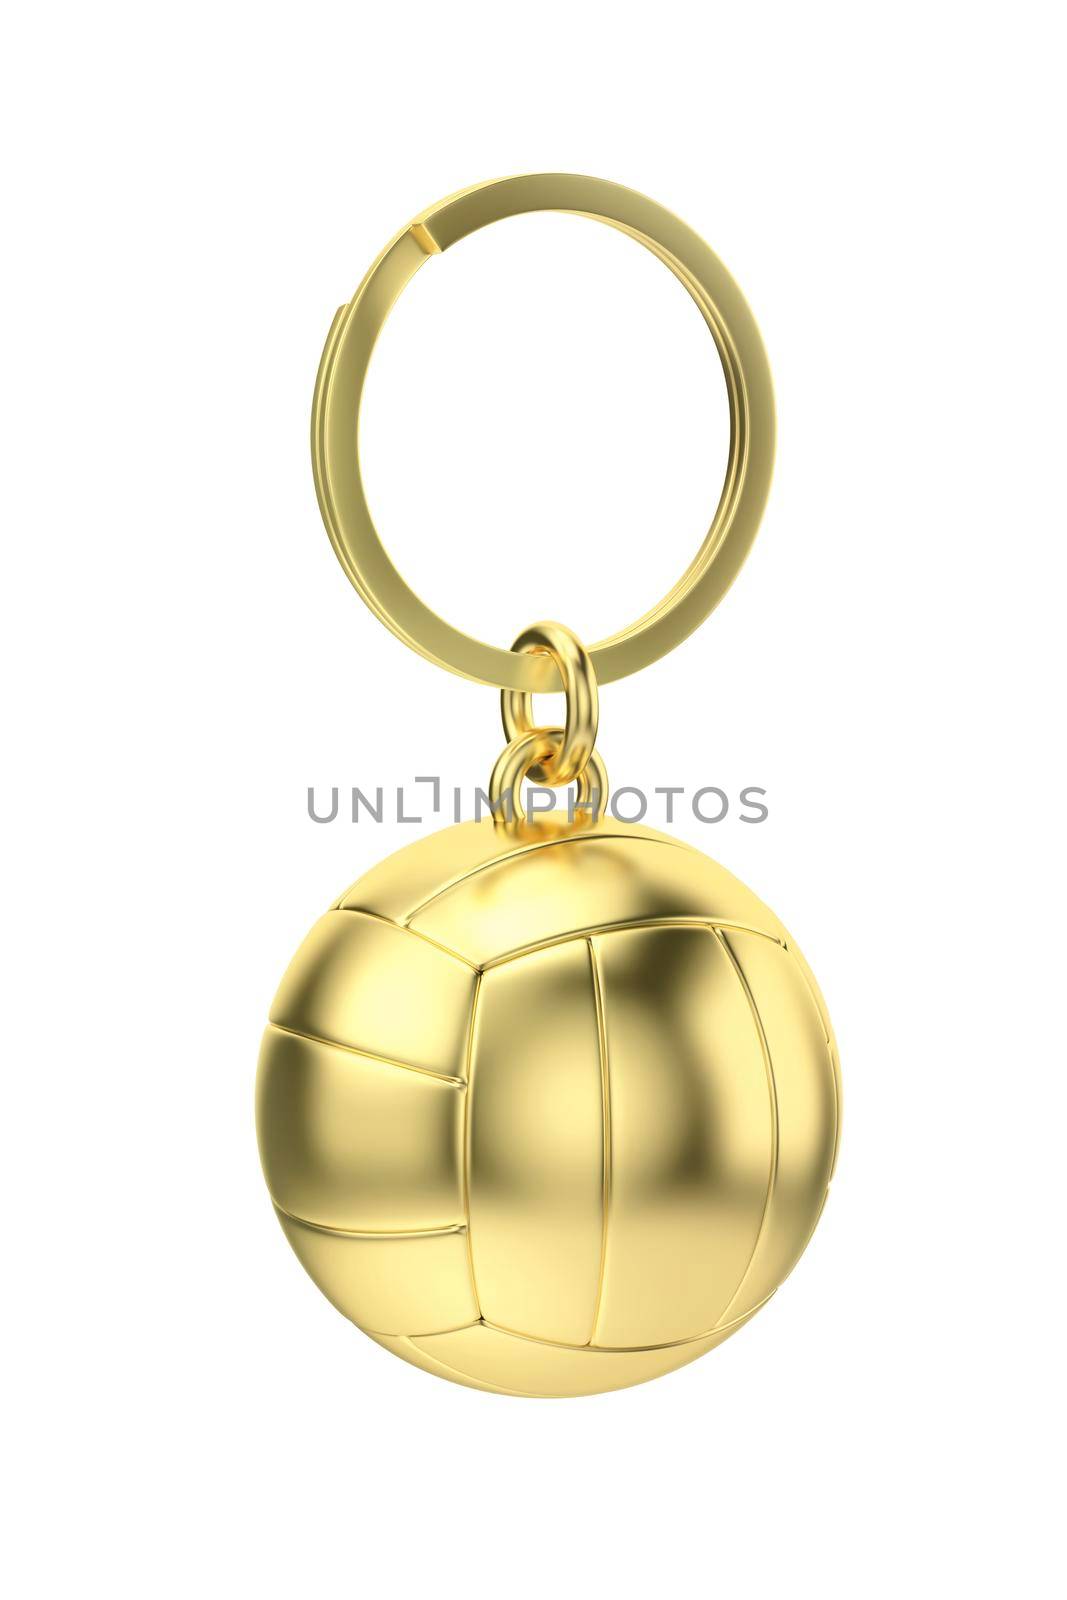 Gold keychain with volleyball ball by magraphics